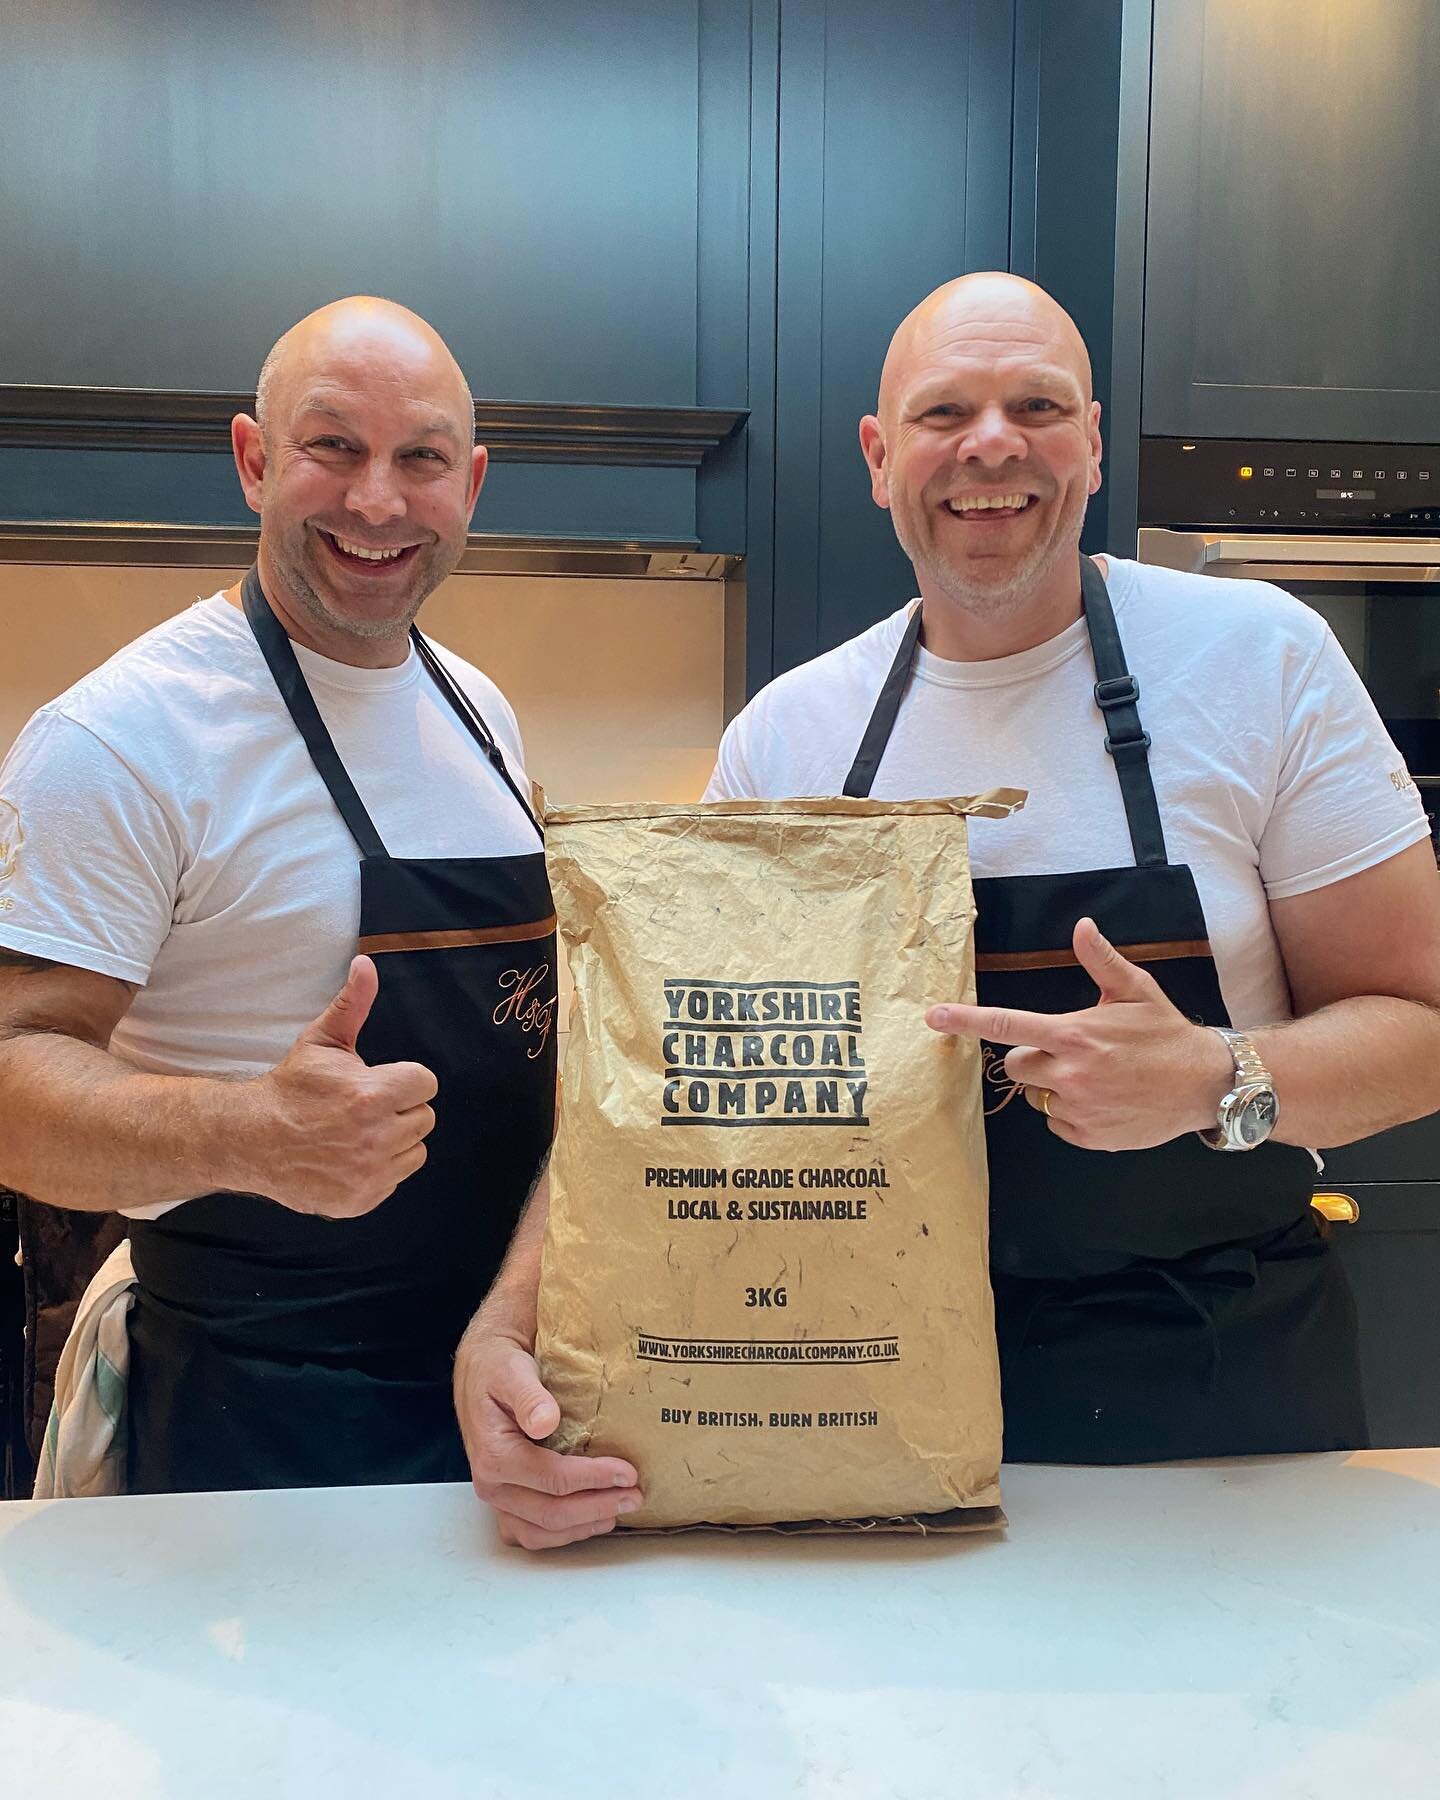 A couple of legends right here and a bag of the finest charcoal. 
Incredible dinner cooked by @cheftomkerridge and @chrismackett and the team from the @handfmarlow and amazing to talk charcoal and outdoor cooking with some proper enthusiasts. 

Eveni